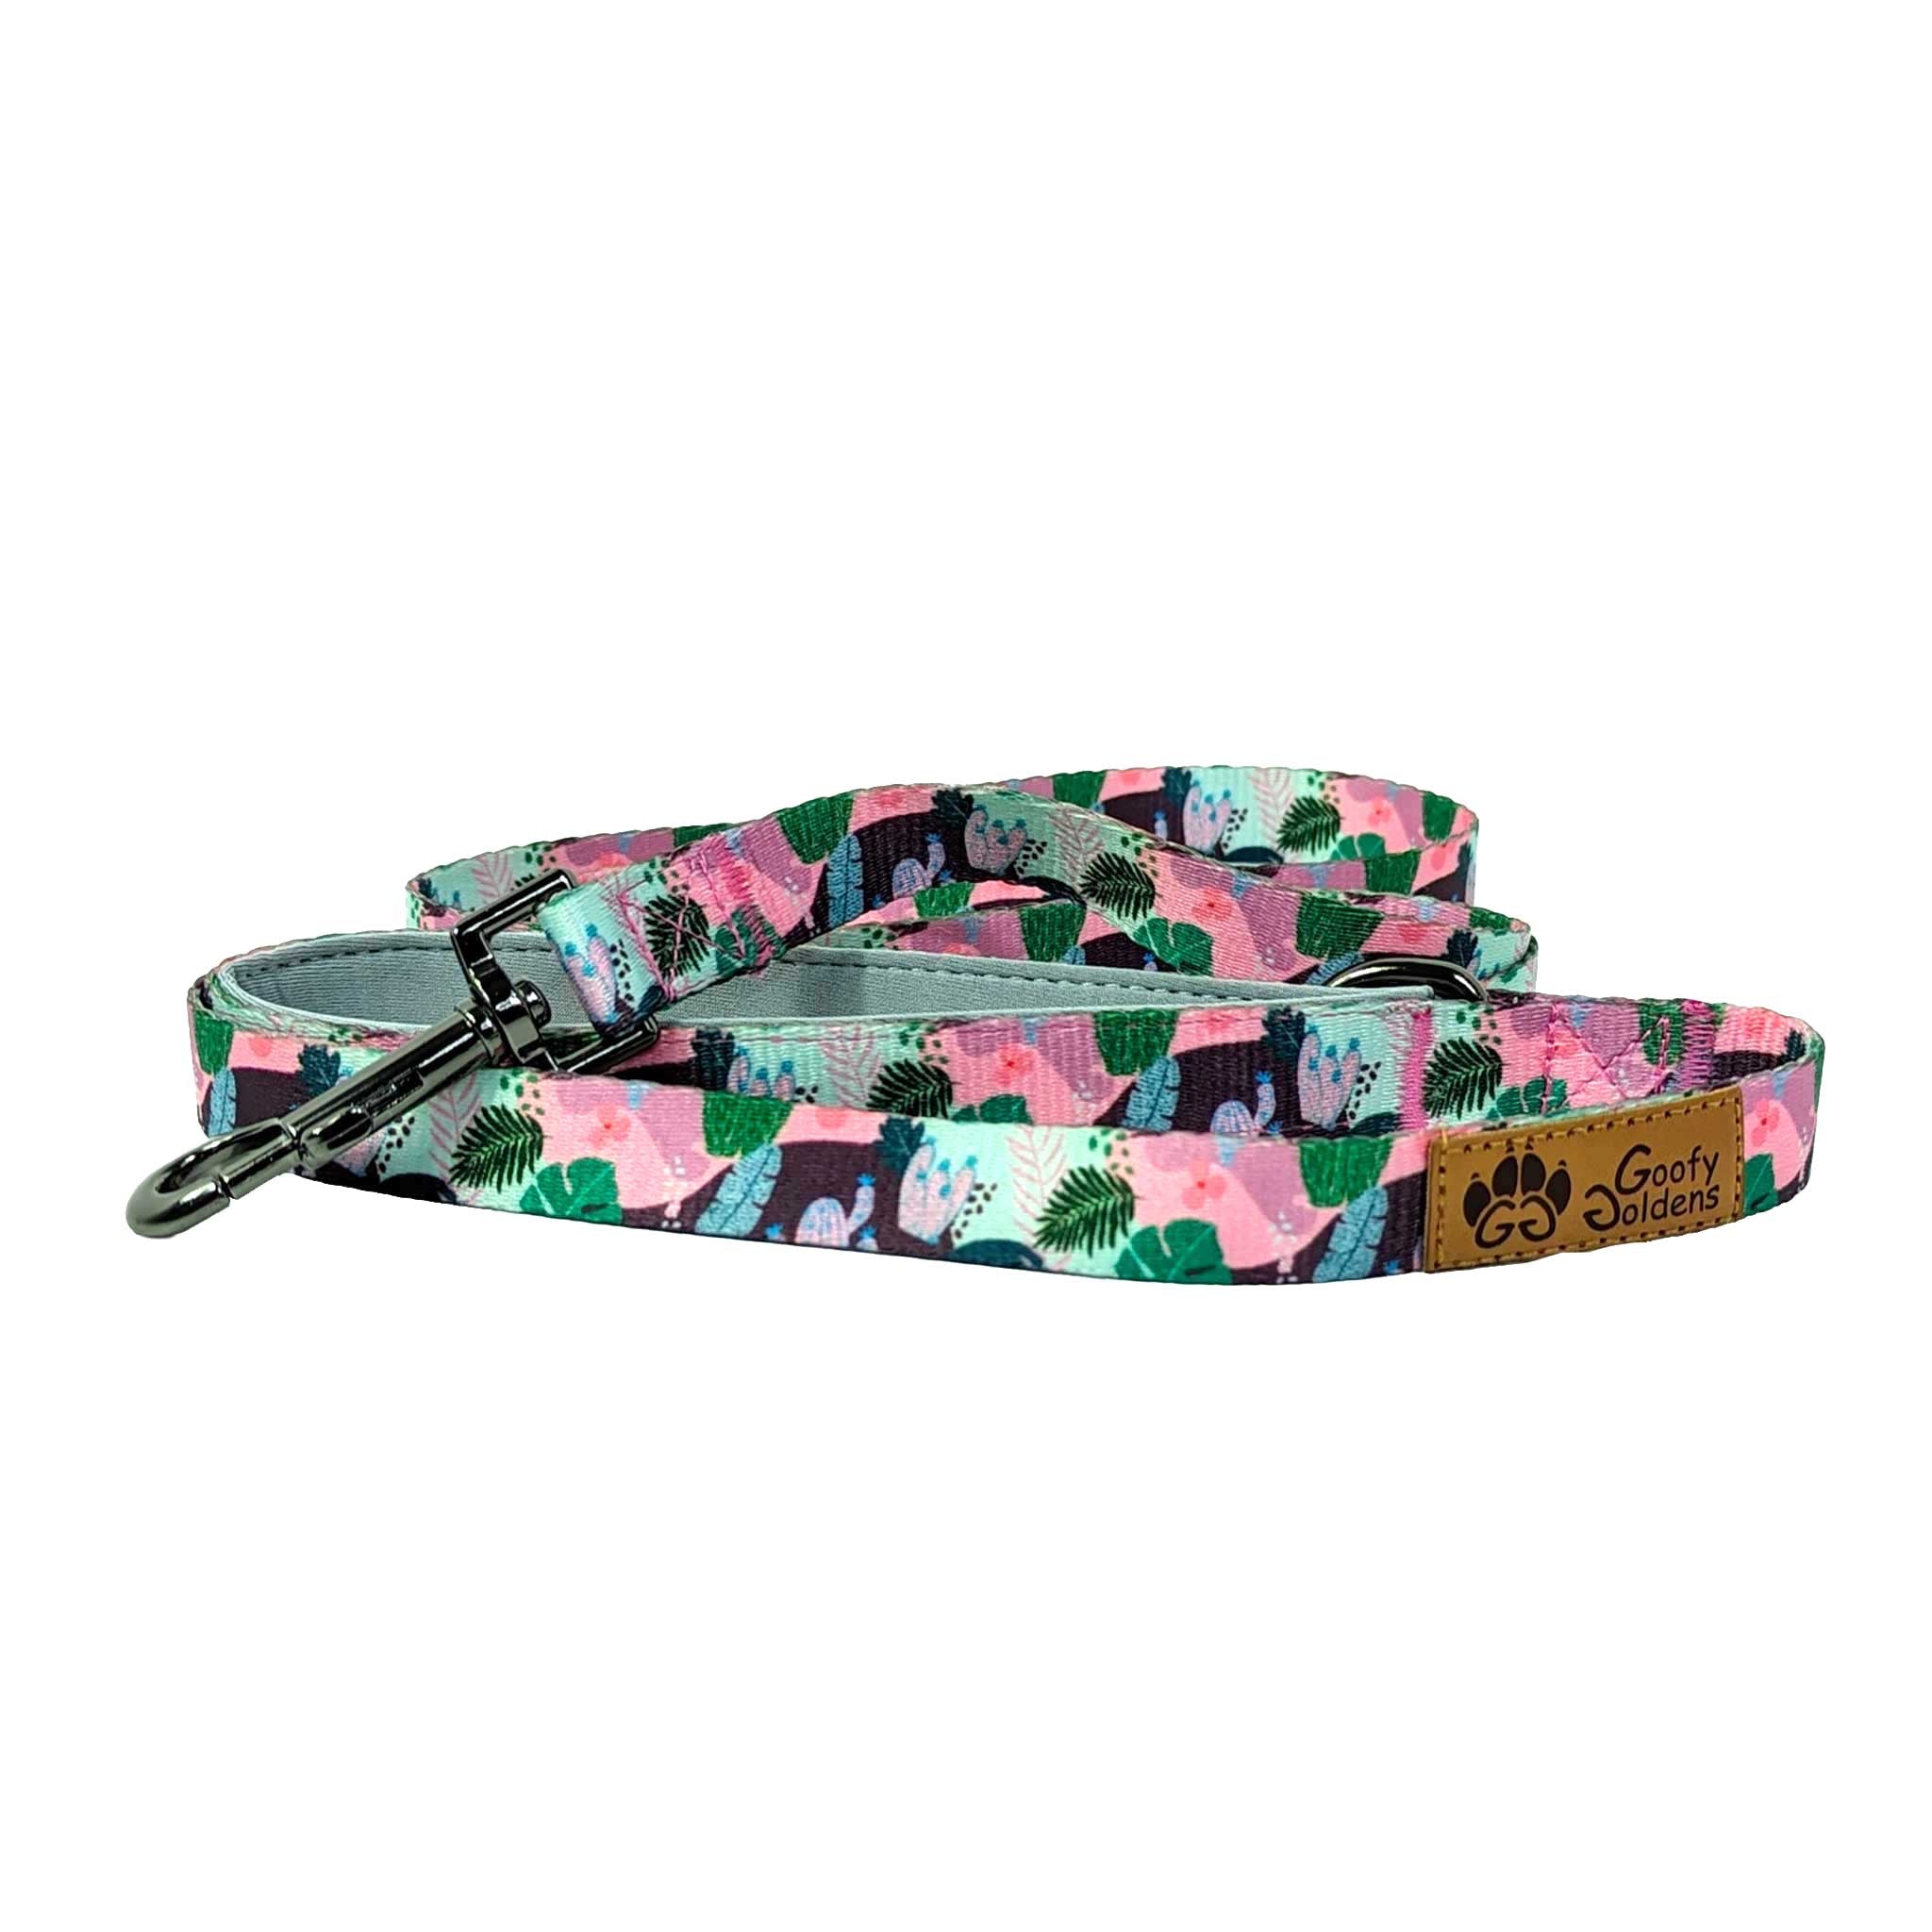 Dog leash: discover our colorful and durable leashes